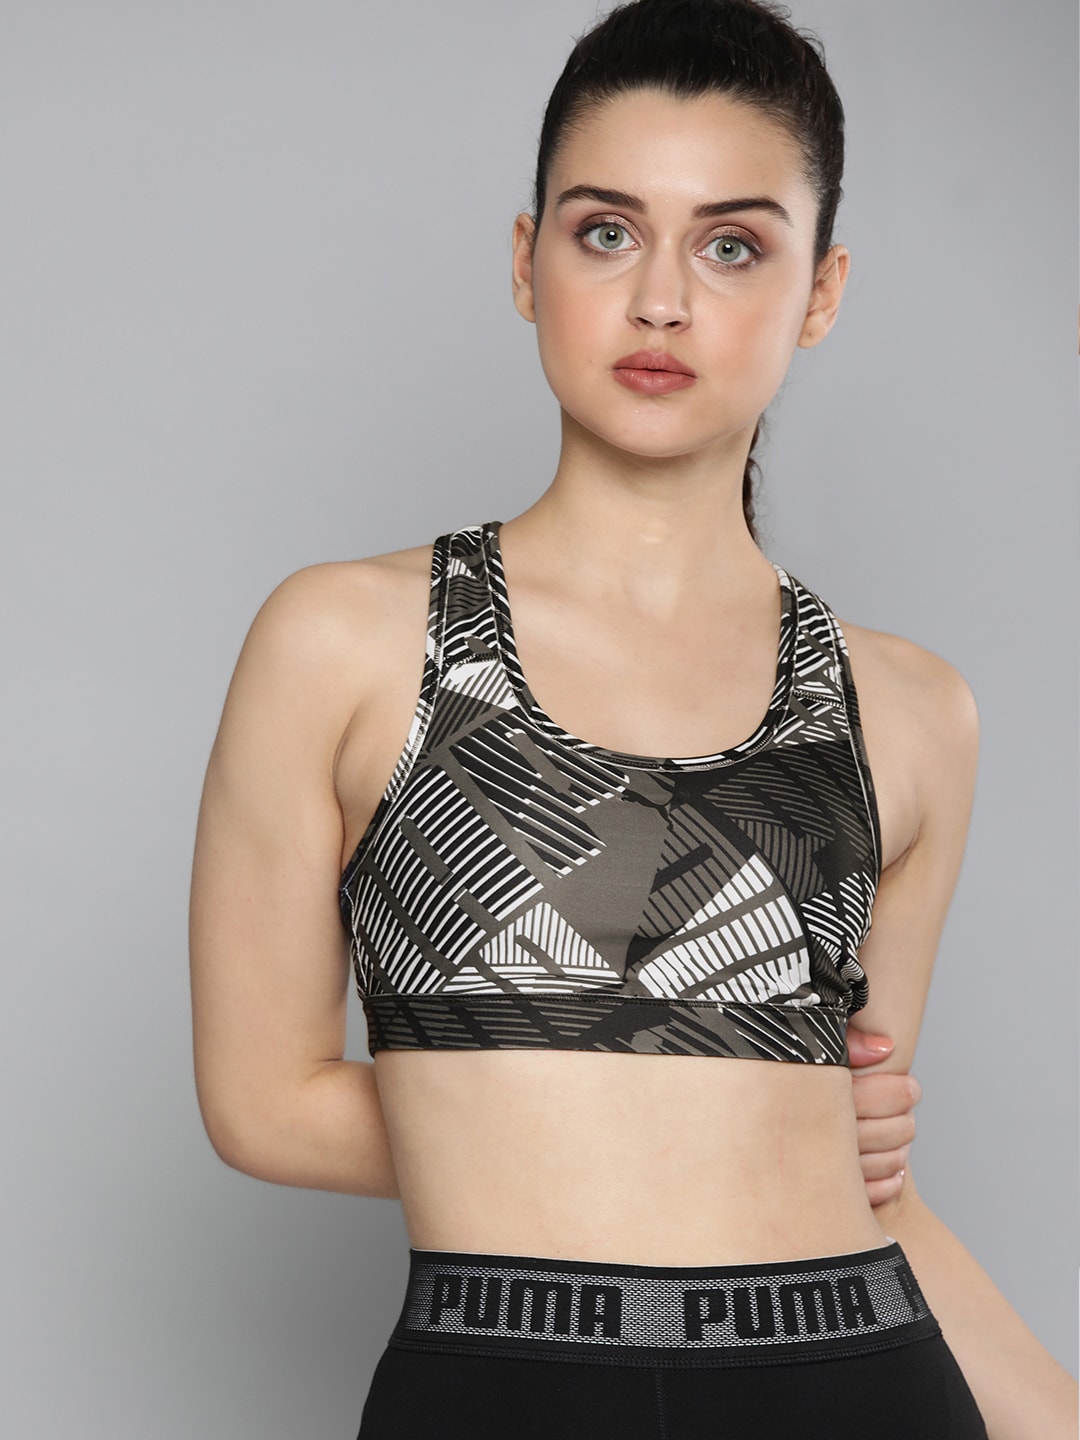 Puma Black & White Printed Non-Wired Lightly Padded Sports Bra 51891201 Price in India